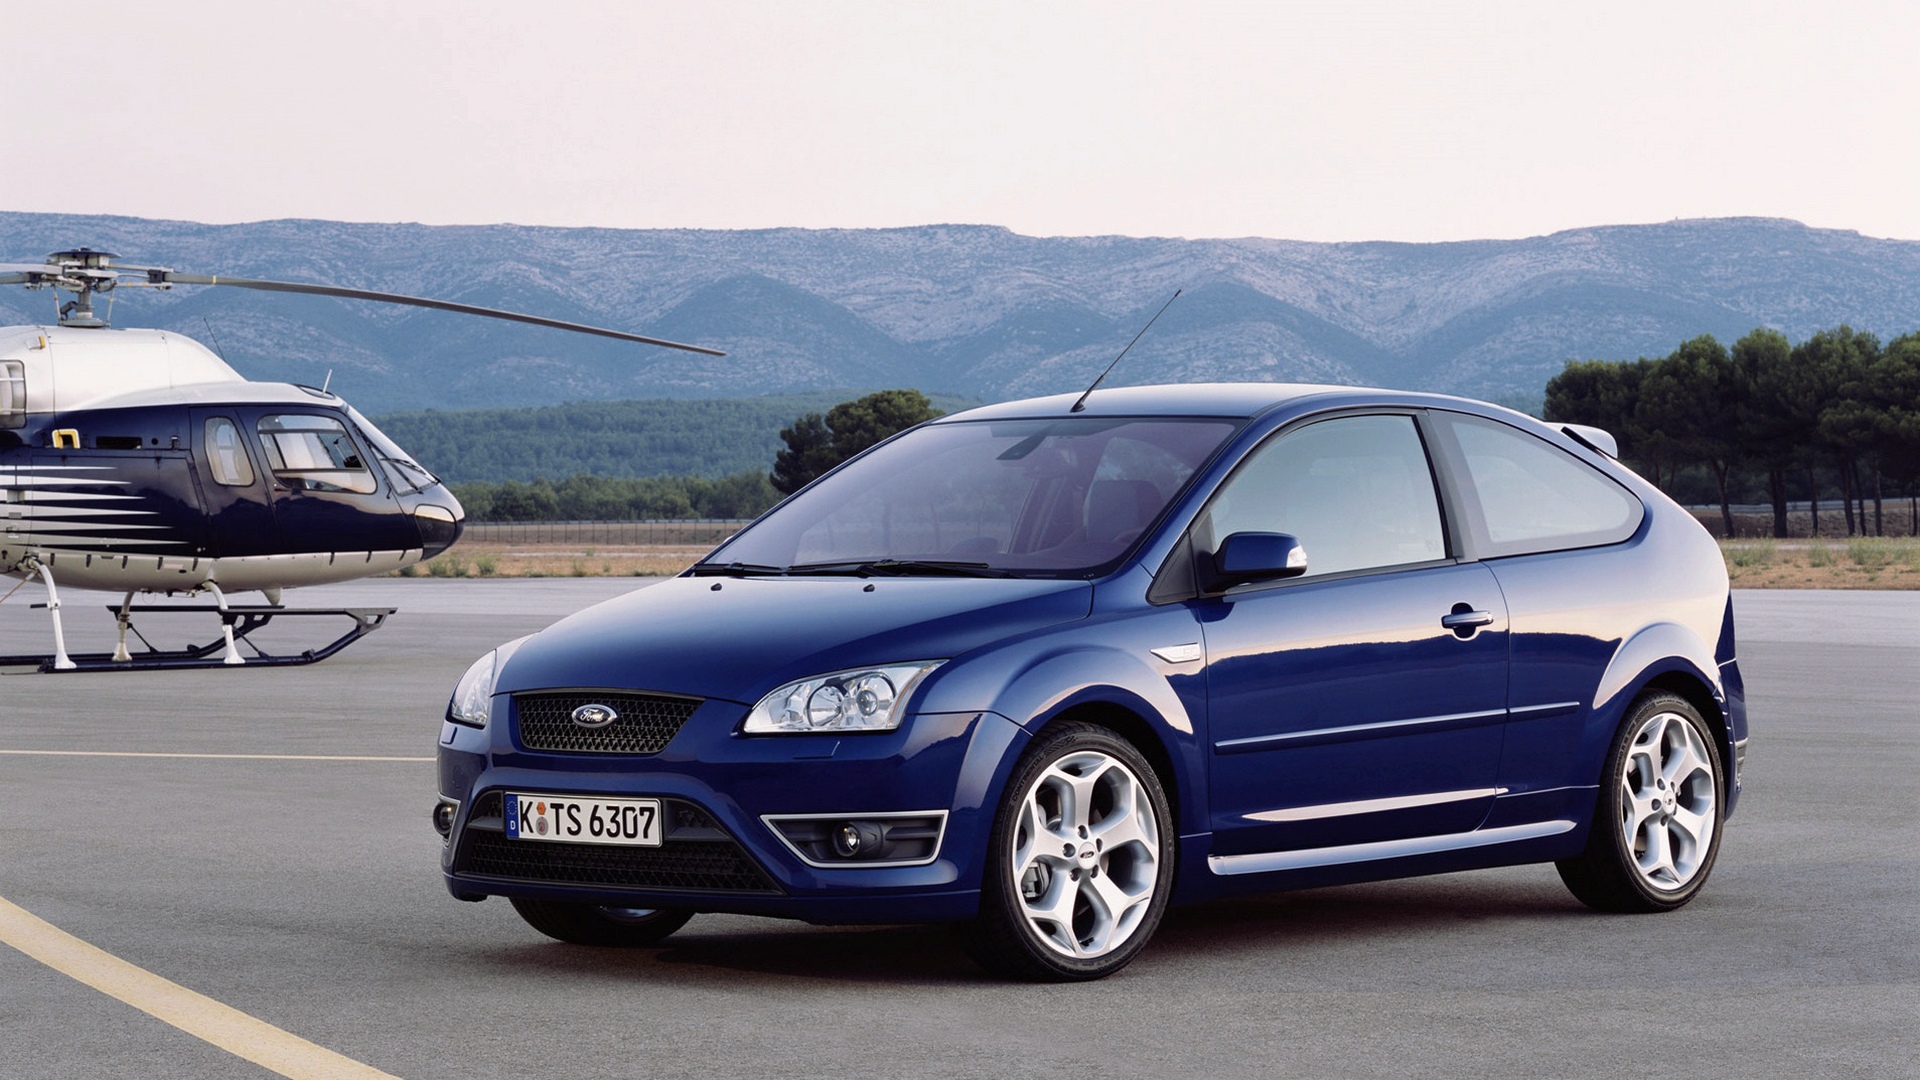 Ford Focus Hd Wallpaper Background Image 1920x1080